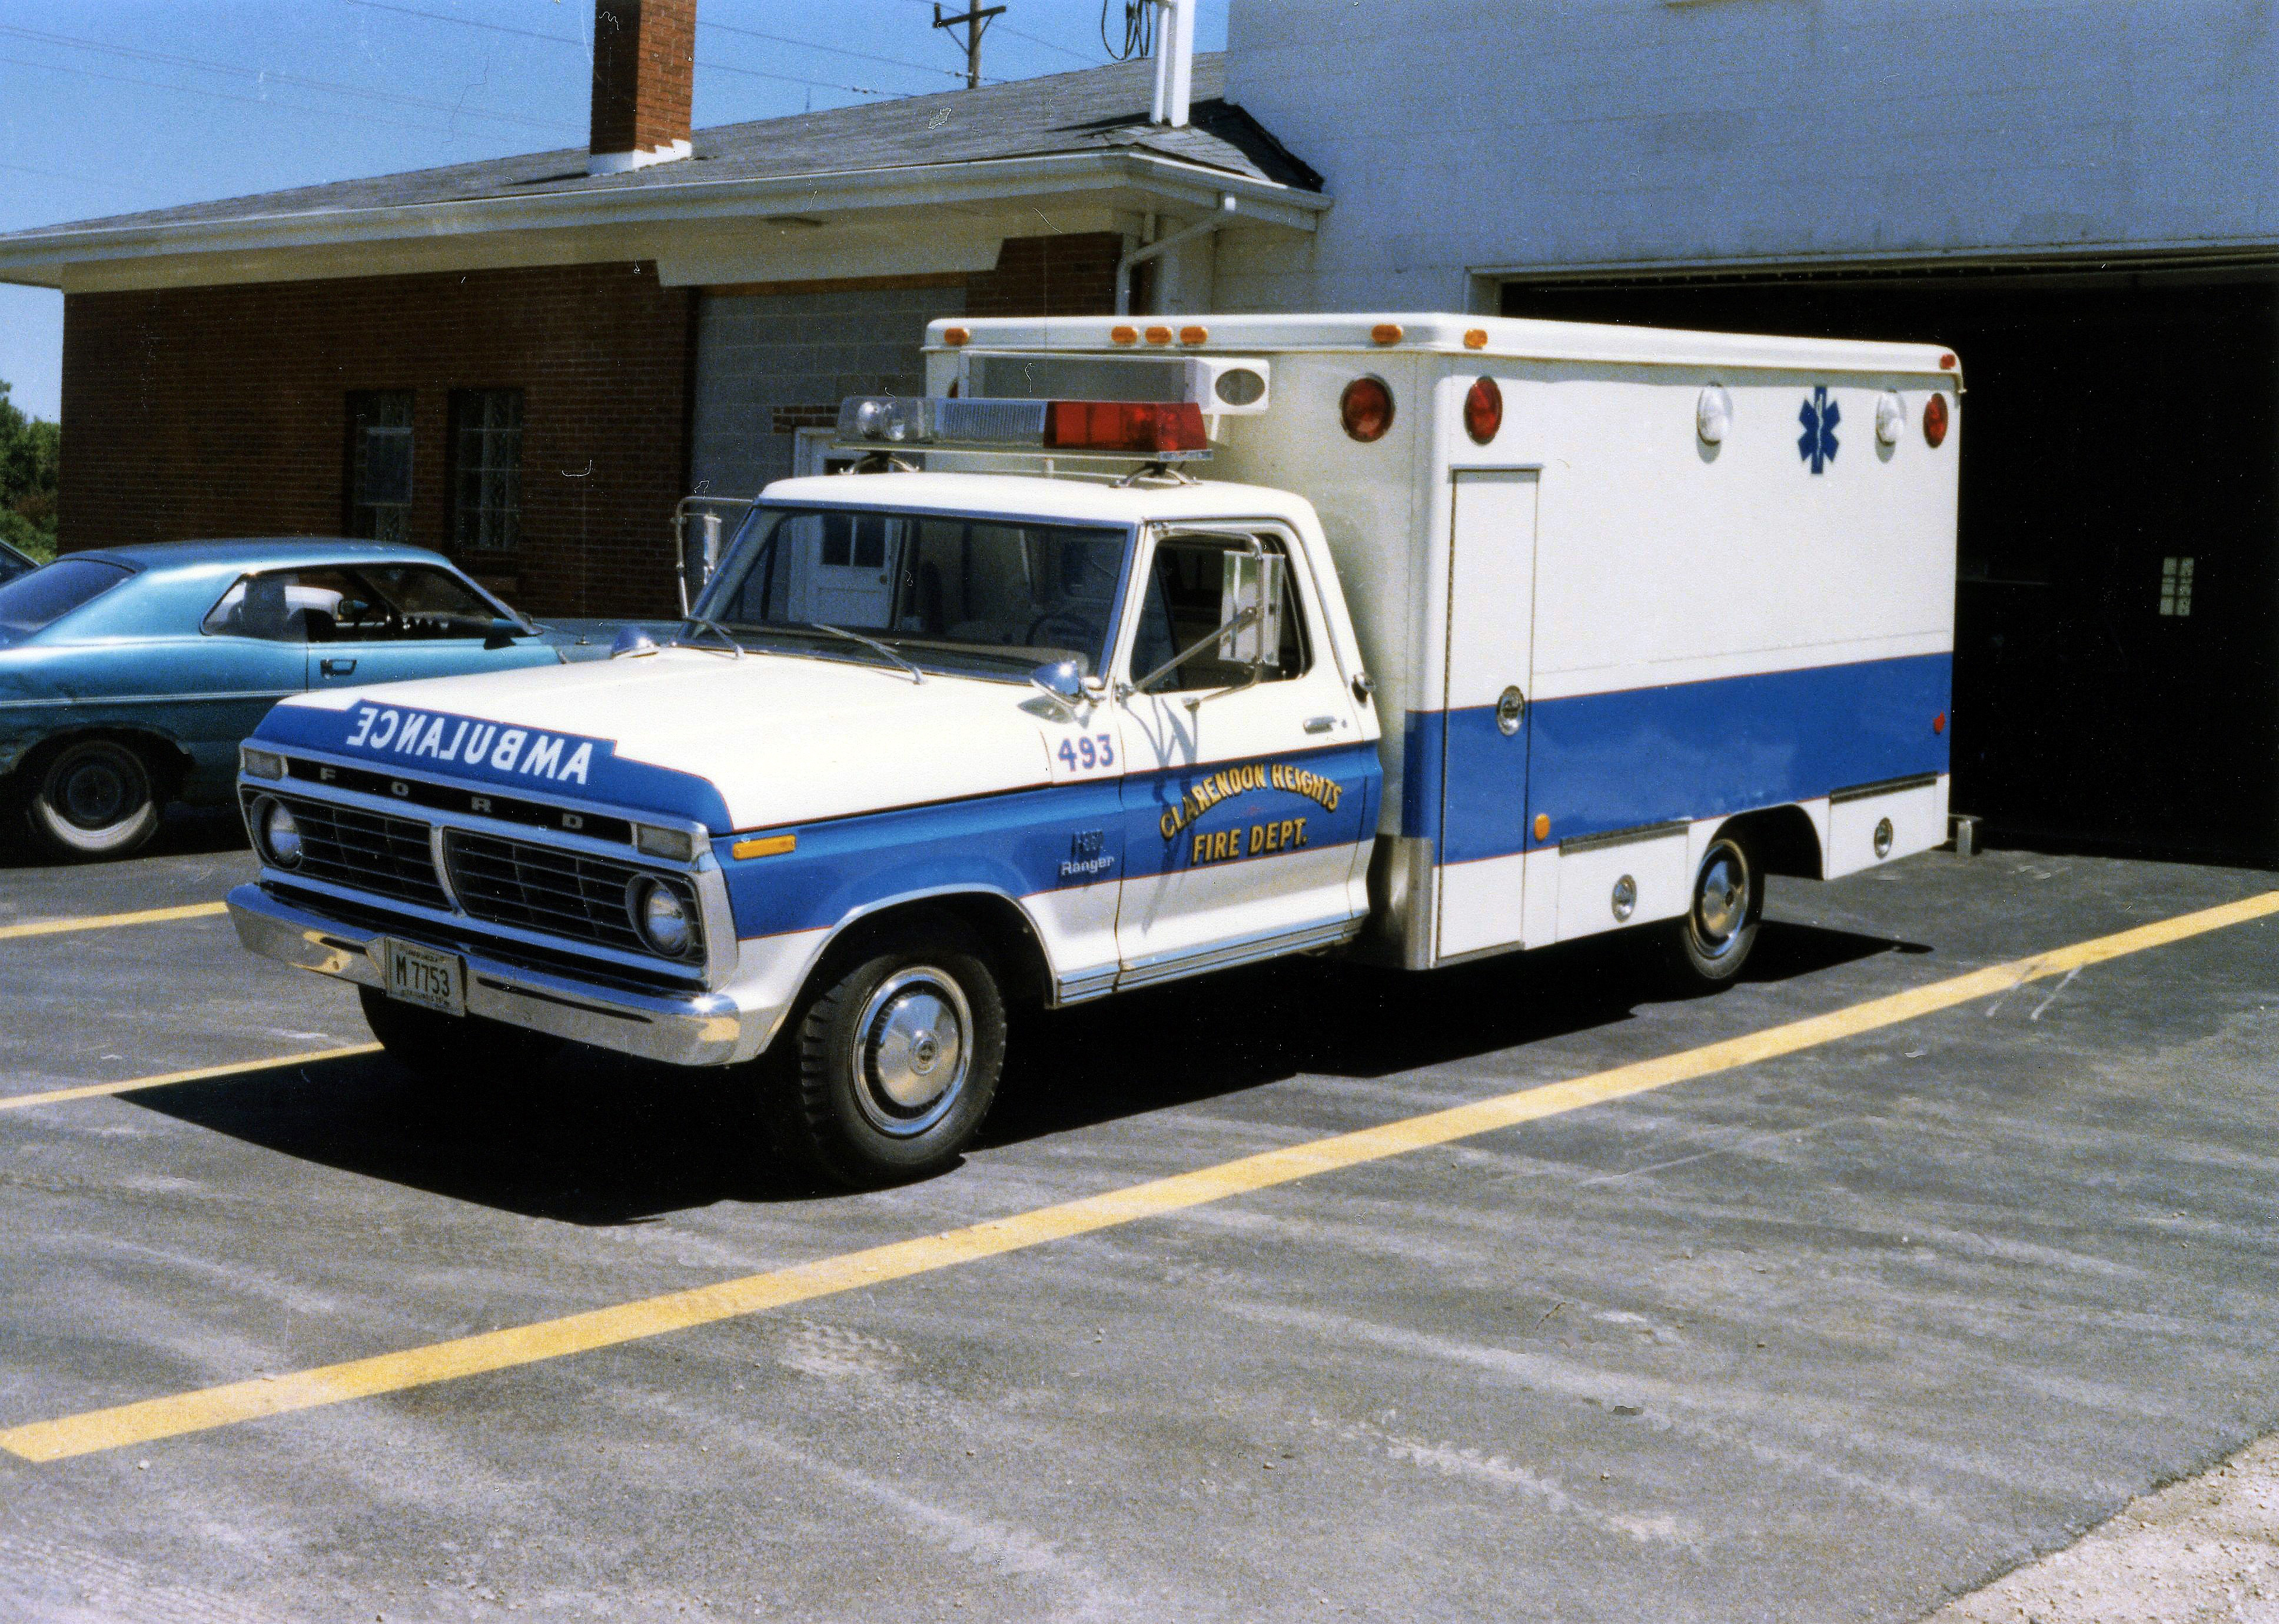 CLARENDON HEIGHTS FPD AMBULANCE 493